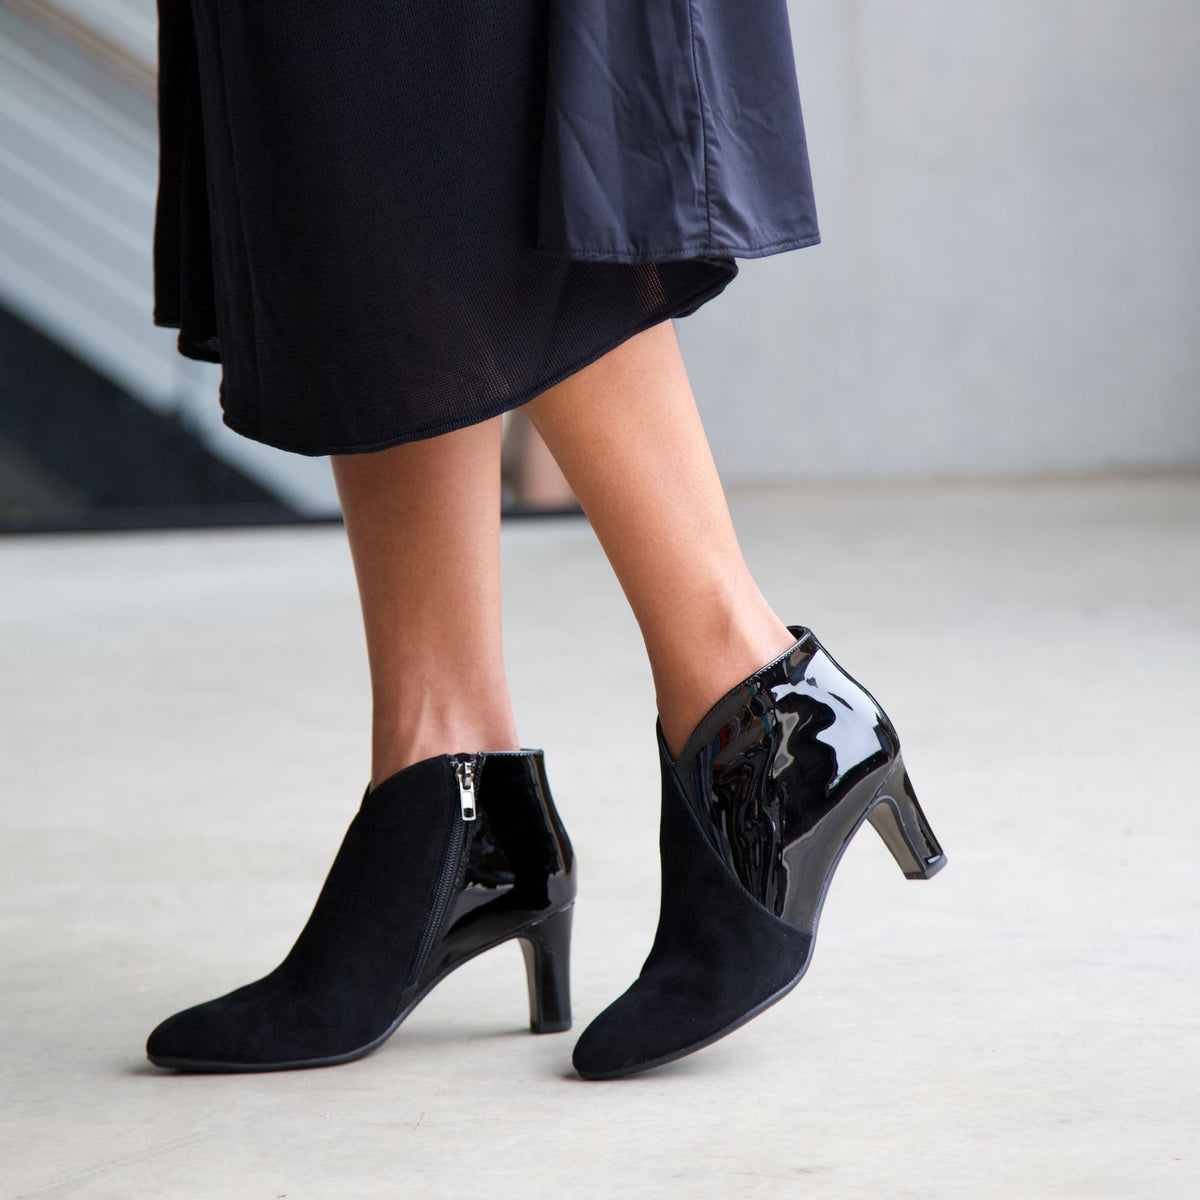 Templess Black Suede/ Black Patent Ankle Boots